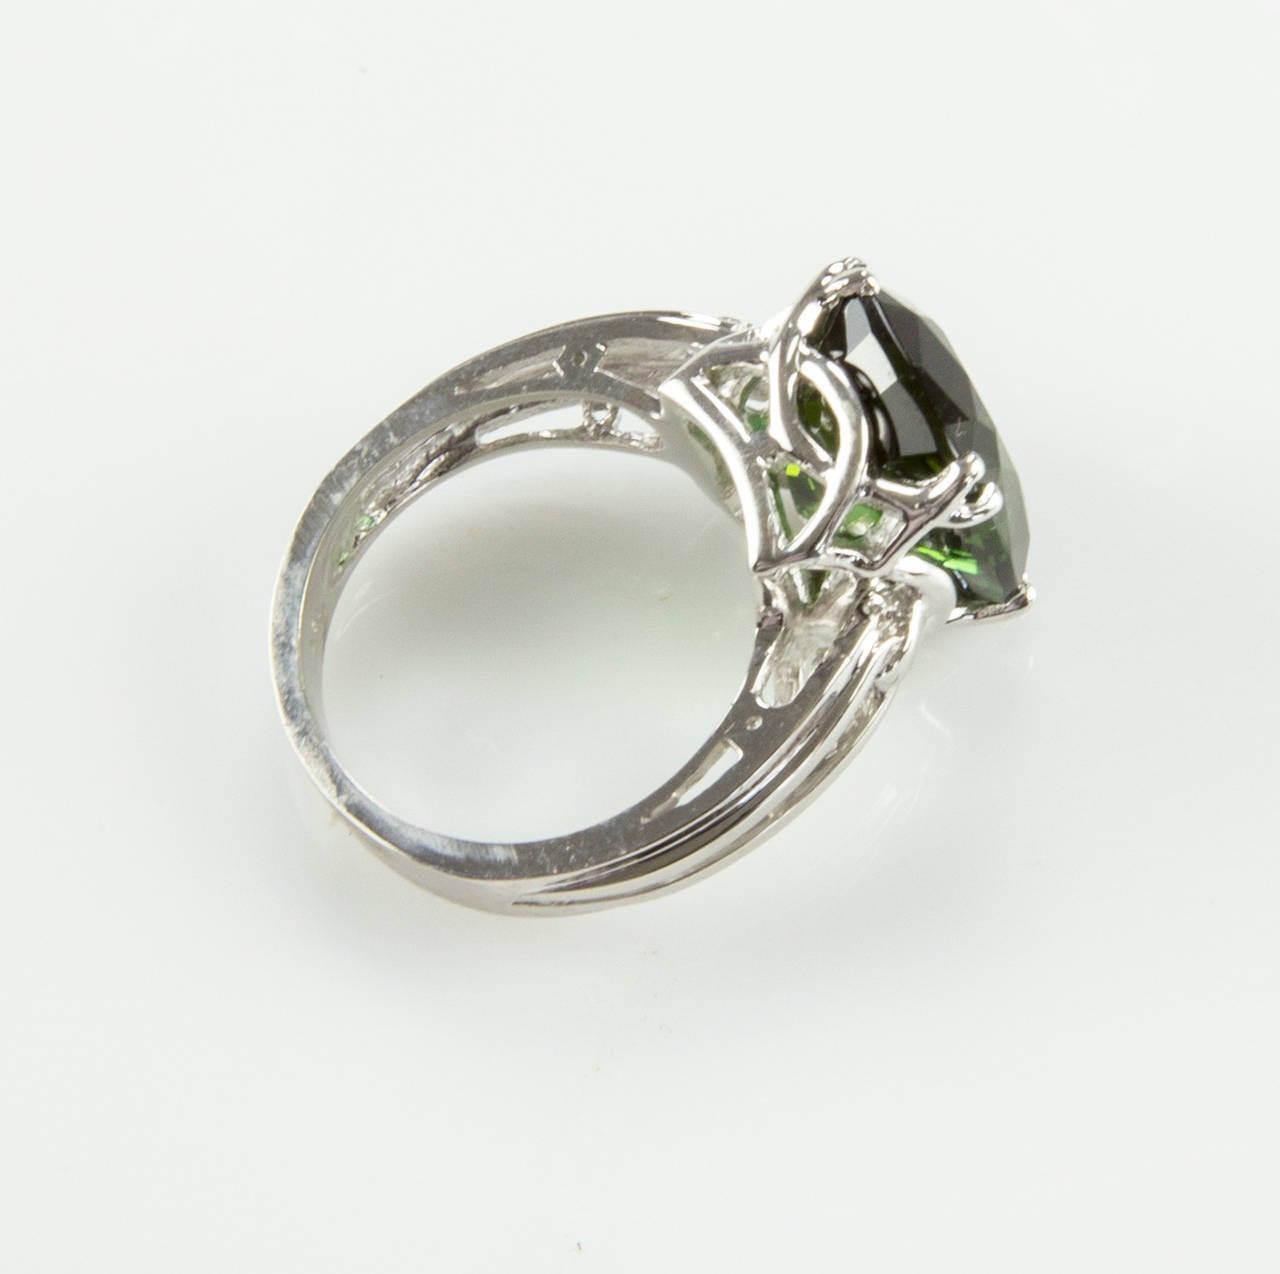 Featuring a Cushion-cut Green Tourmaline 8.54ct; beautifully hand crafted in 18k white gold with Classic eight claw mounting with split half-round shank; handmade; 8.39gm. Ring size 7. We offer complimentary ring re-sizing. Classic and simple…Always